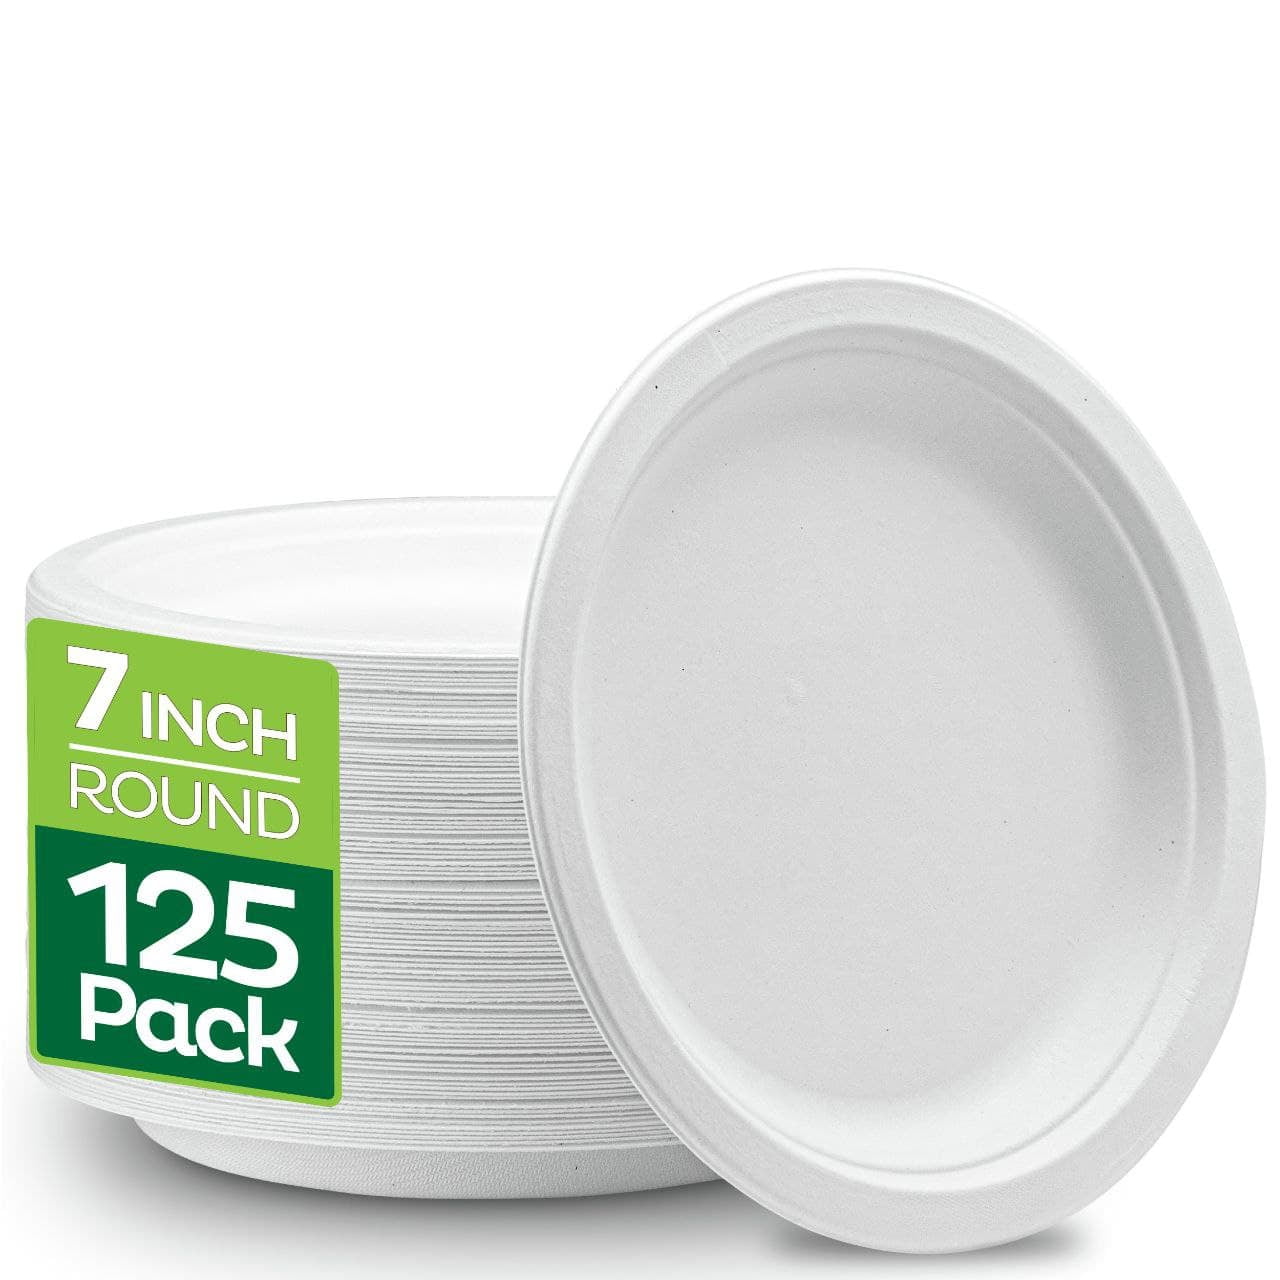 GREENESAGE 300 Pack Paper Plates Bulk, 7 inch Small Paper Plates, 100%  Compostable Plates Eco Friendly Disposable Plates, White Paper Plates for  Party